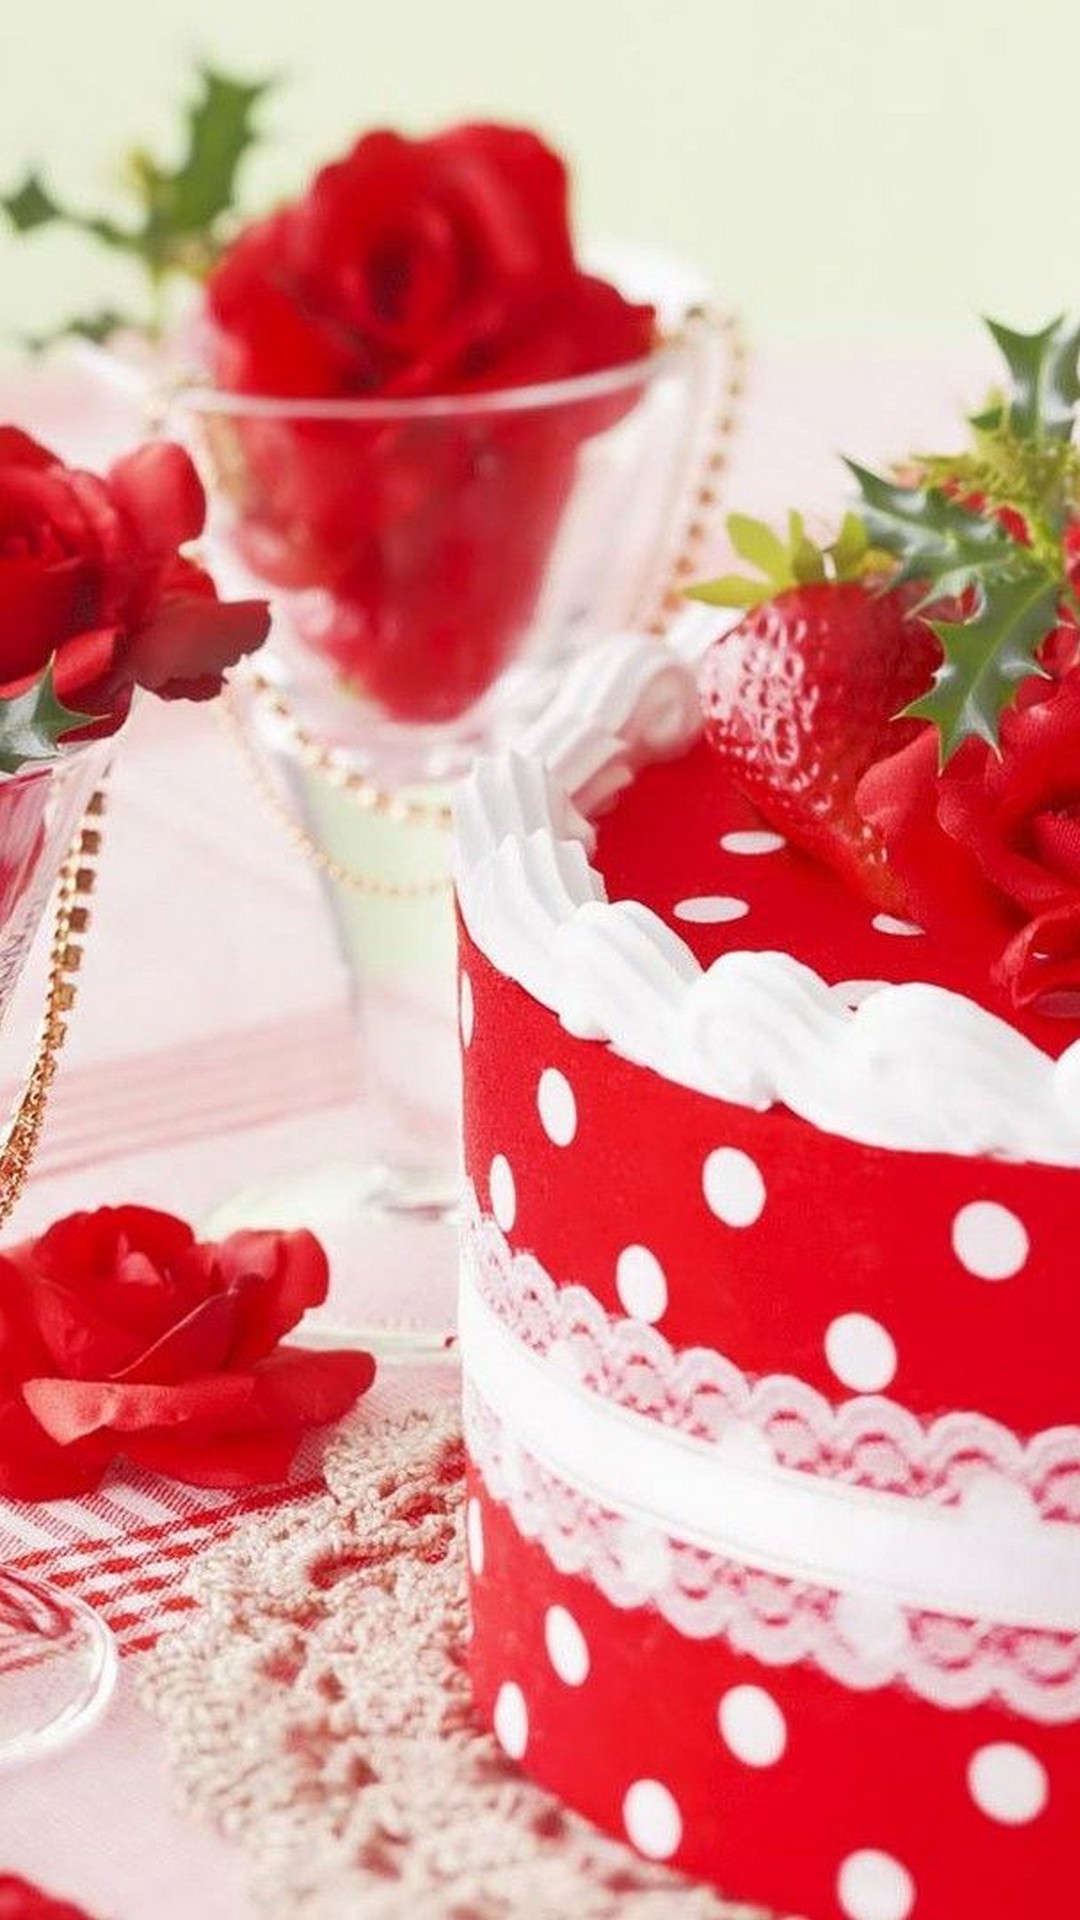 Strawberry Cake HD Wallpaper For Android Free Download